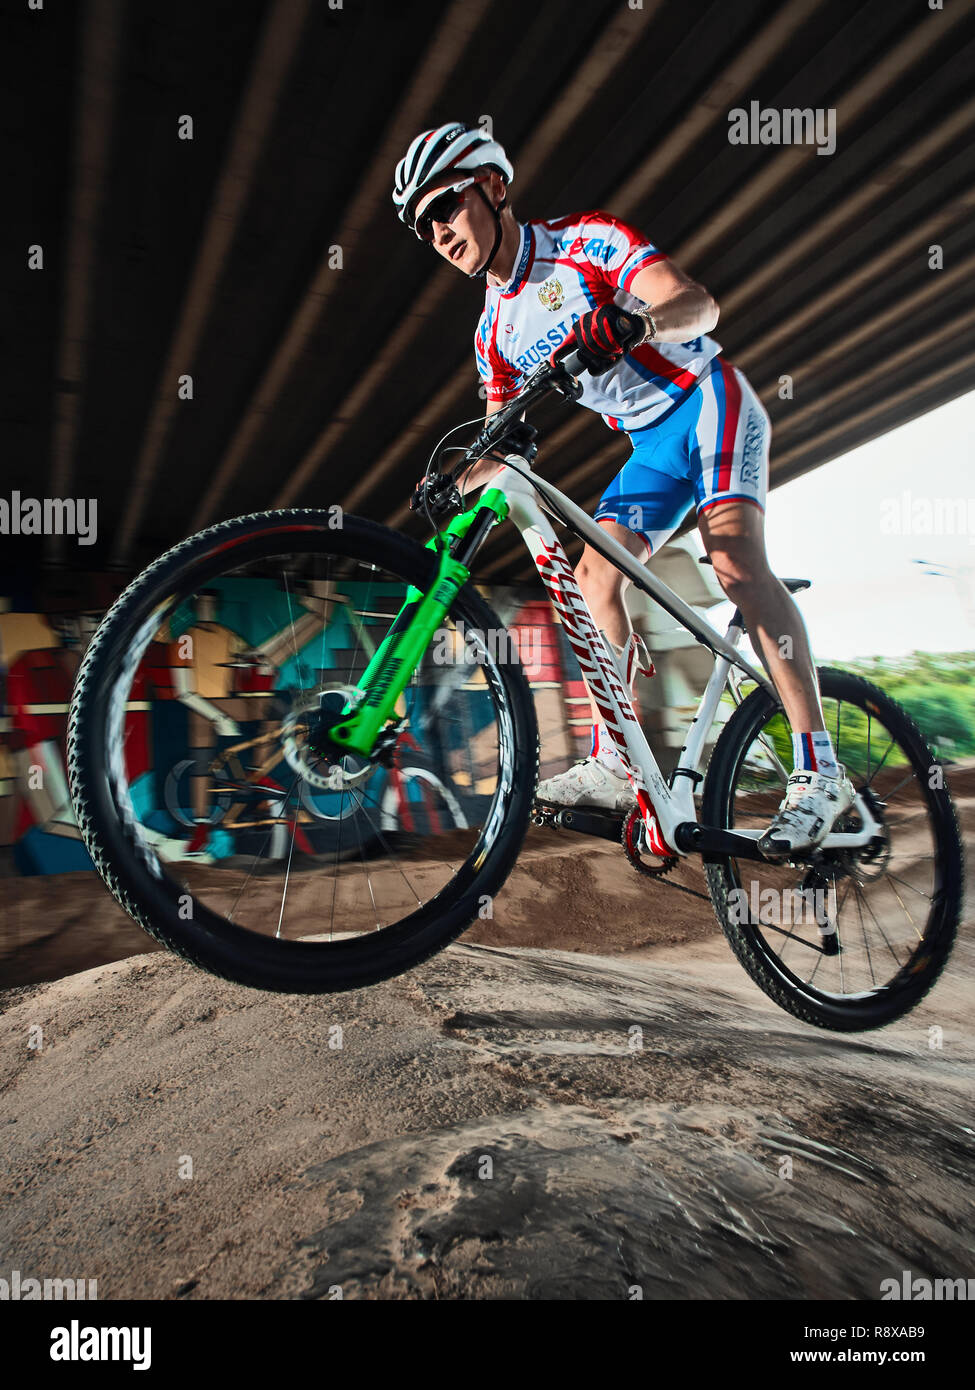 Moscow, Russia - August 10, 2017: Mountain Bike cyclist riding pump track.  Rider in action at mountain bike sport. Cool athlete cyclist on a bike. MTB  Stock Photo - Alamy